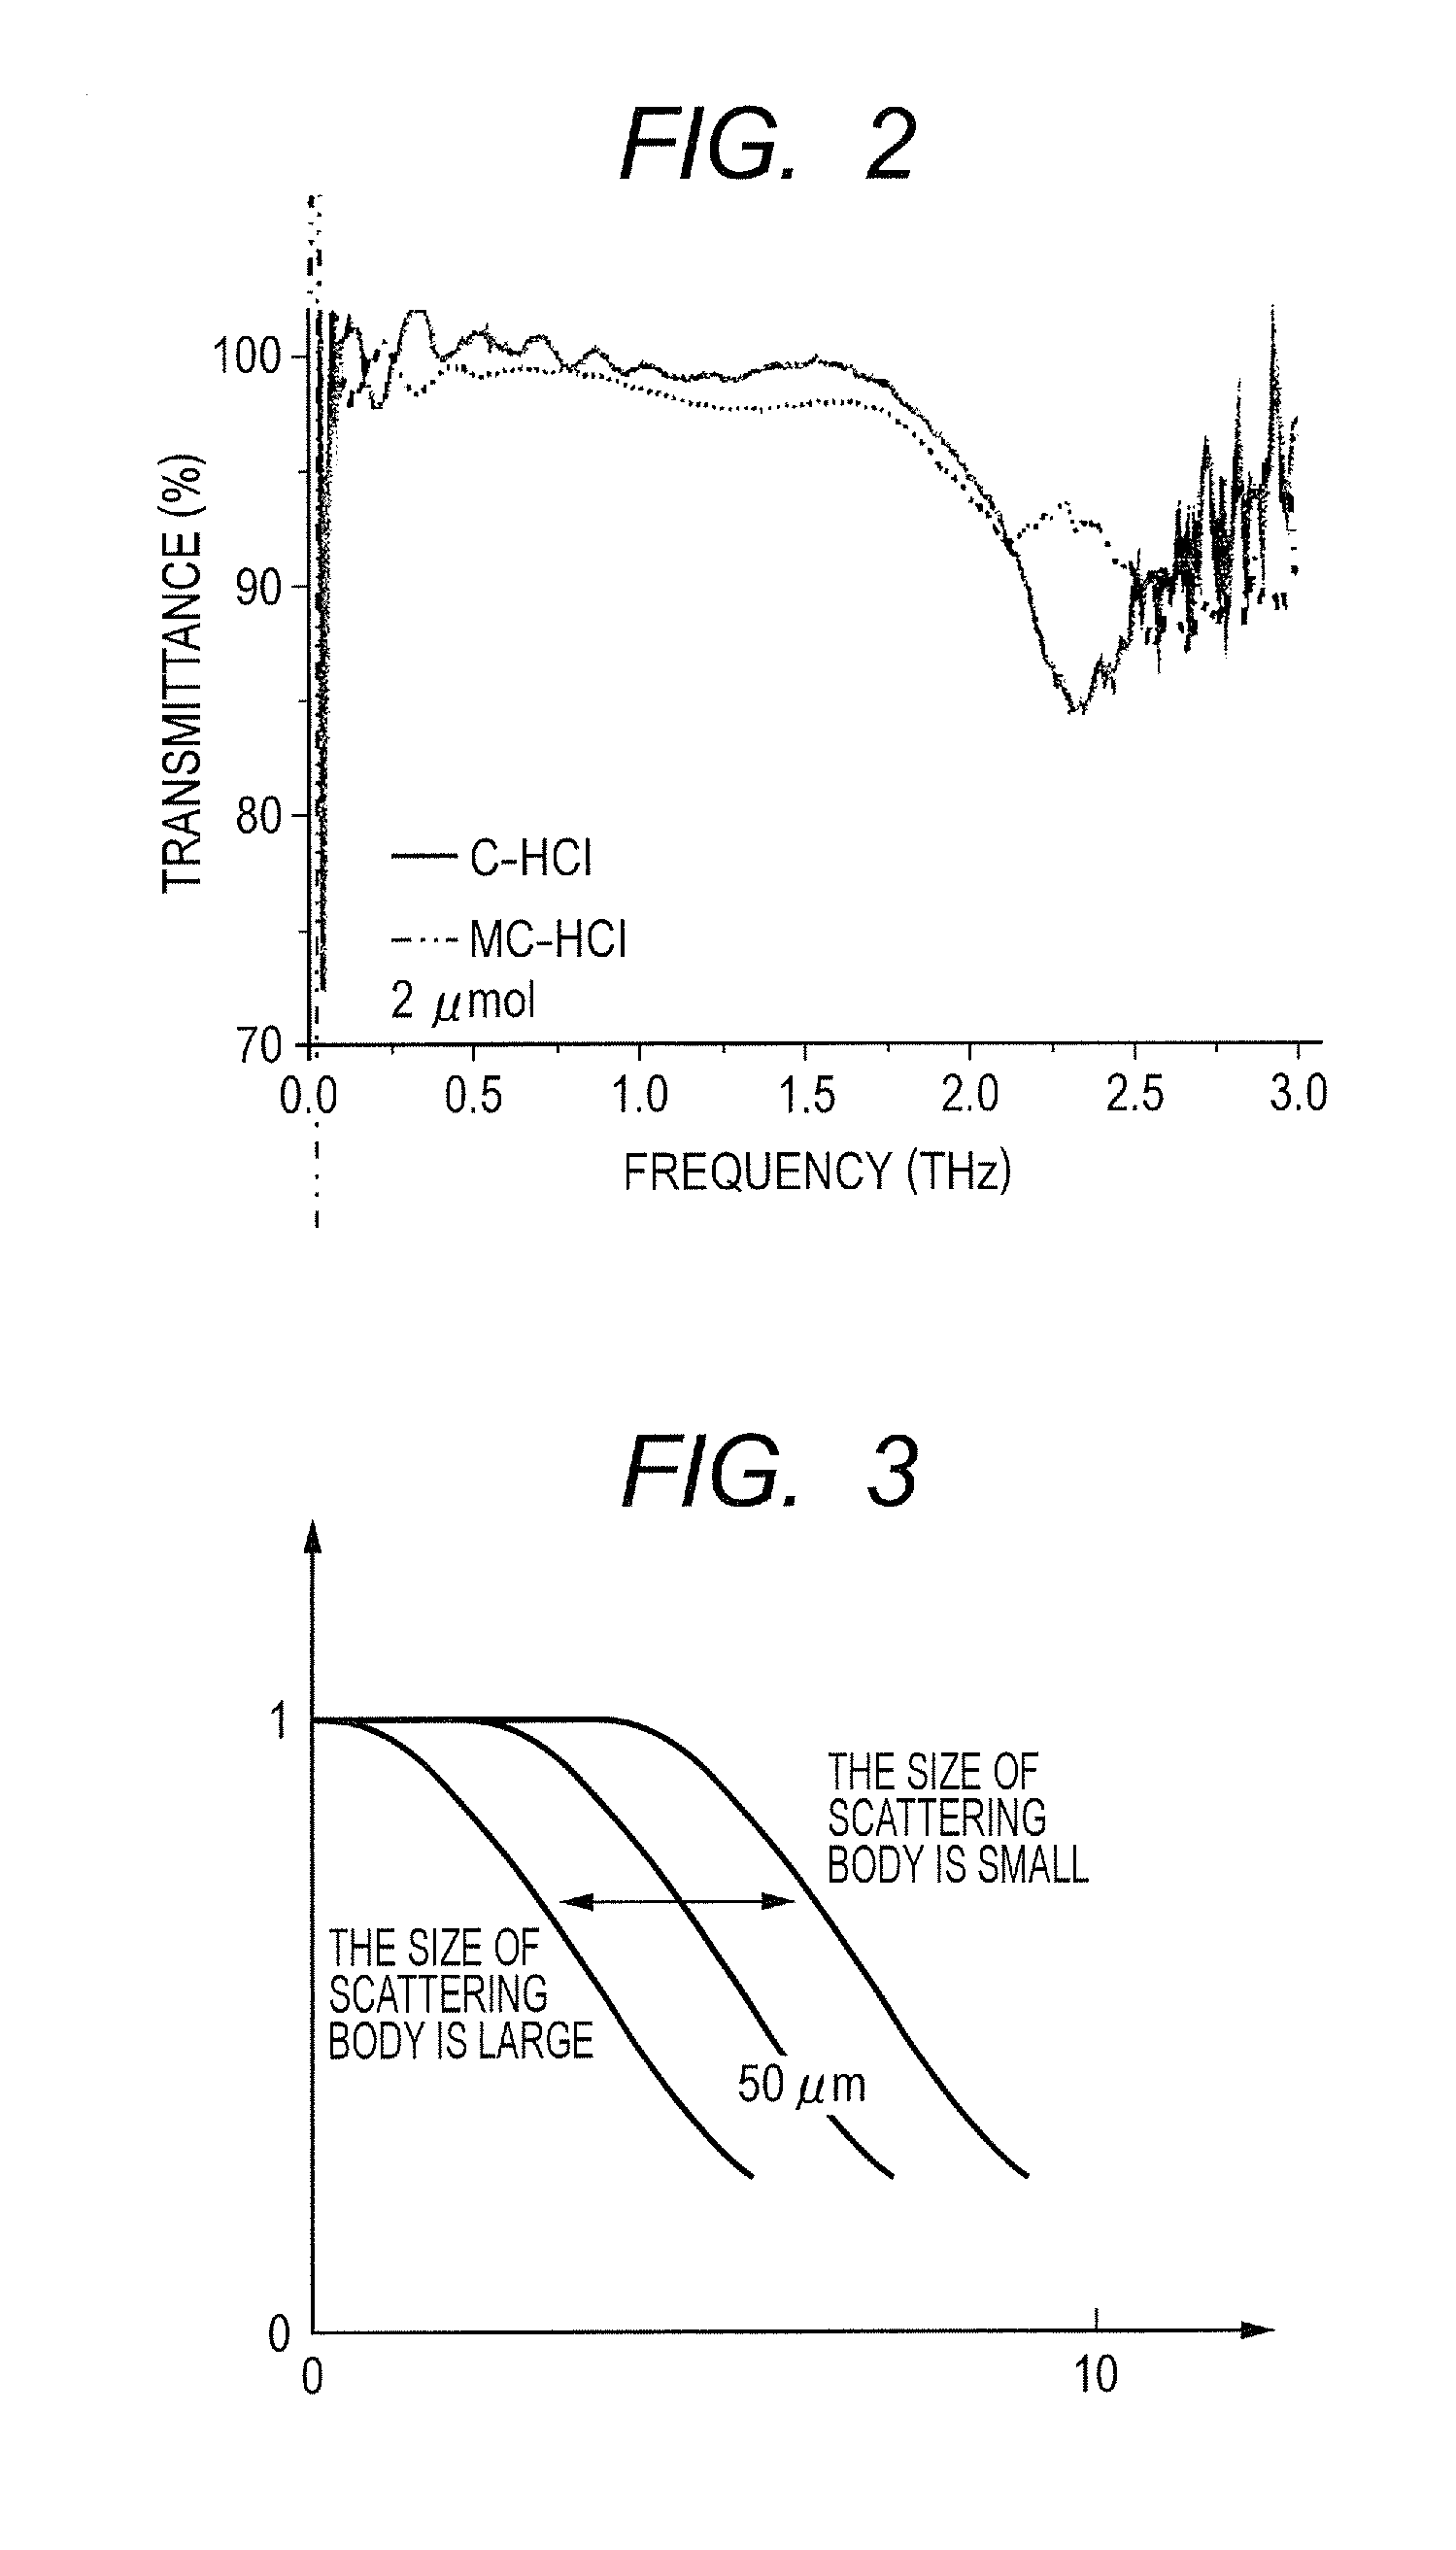 Apparatus and method for analyzing state of DNA